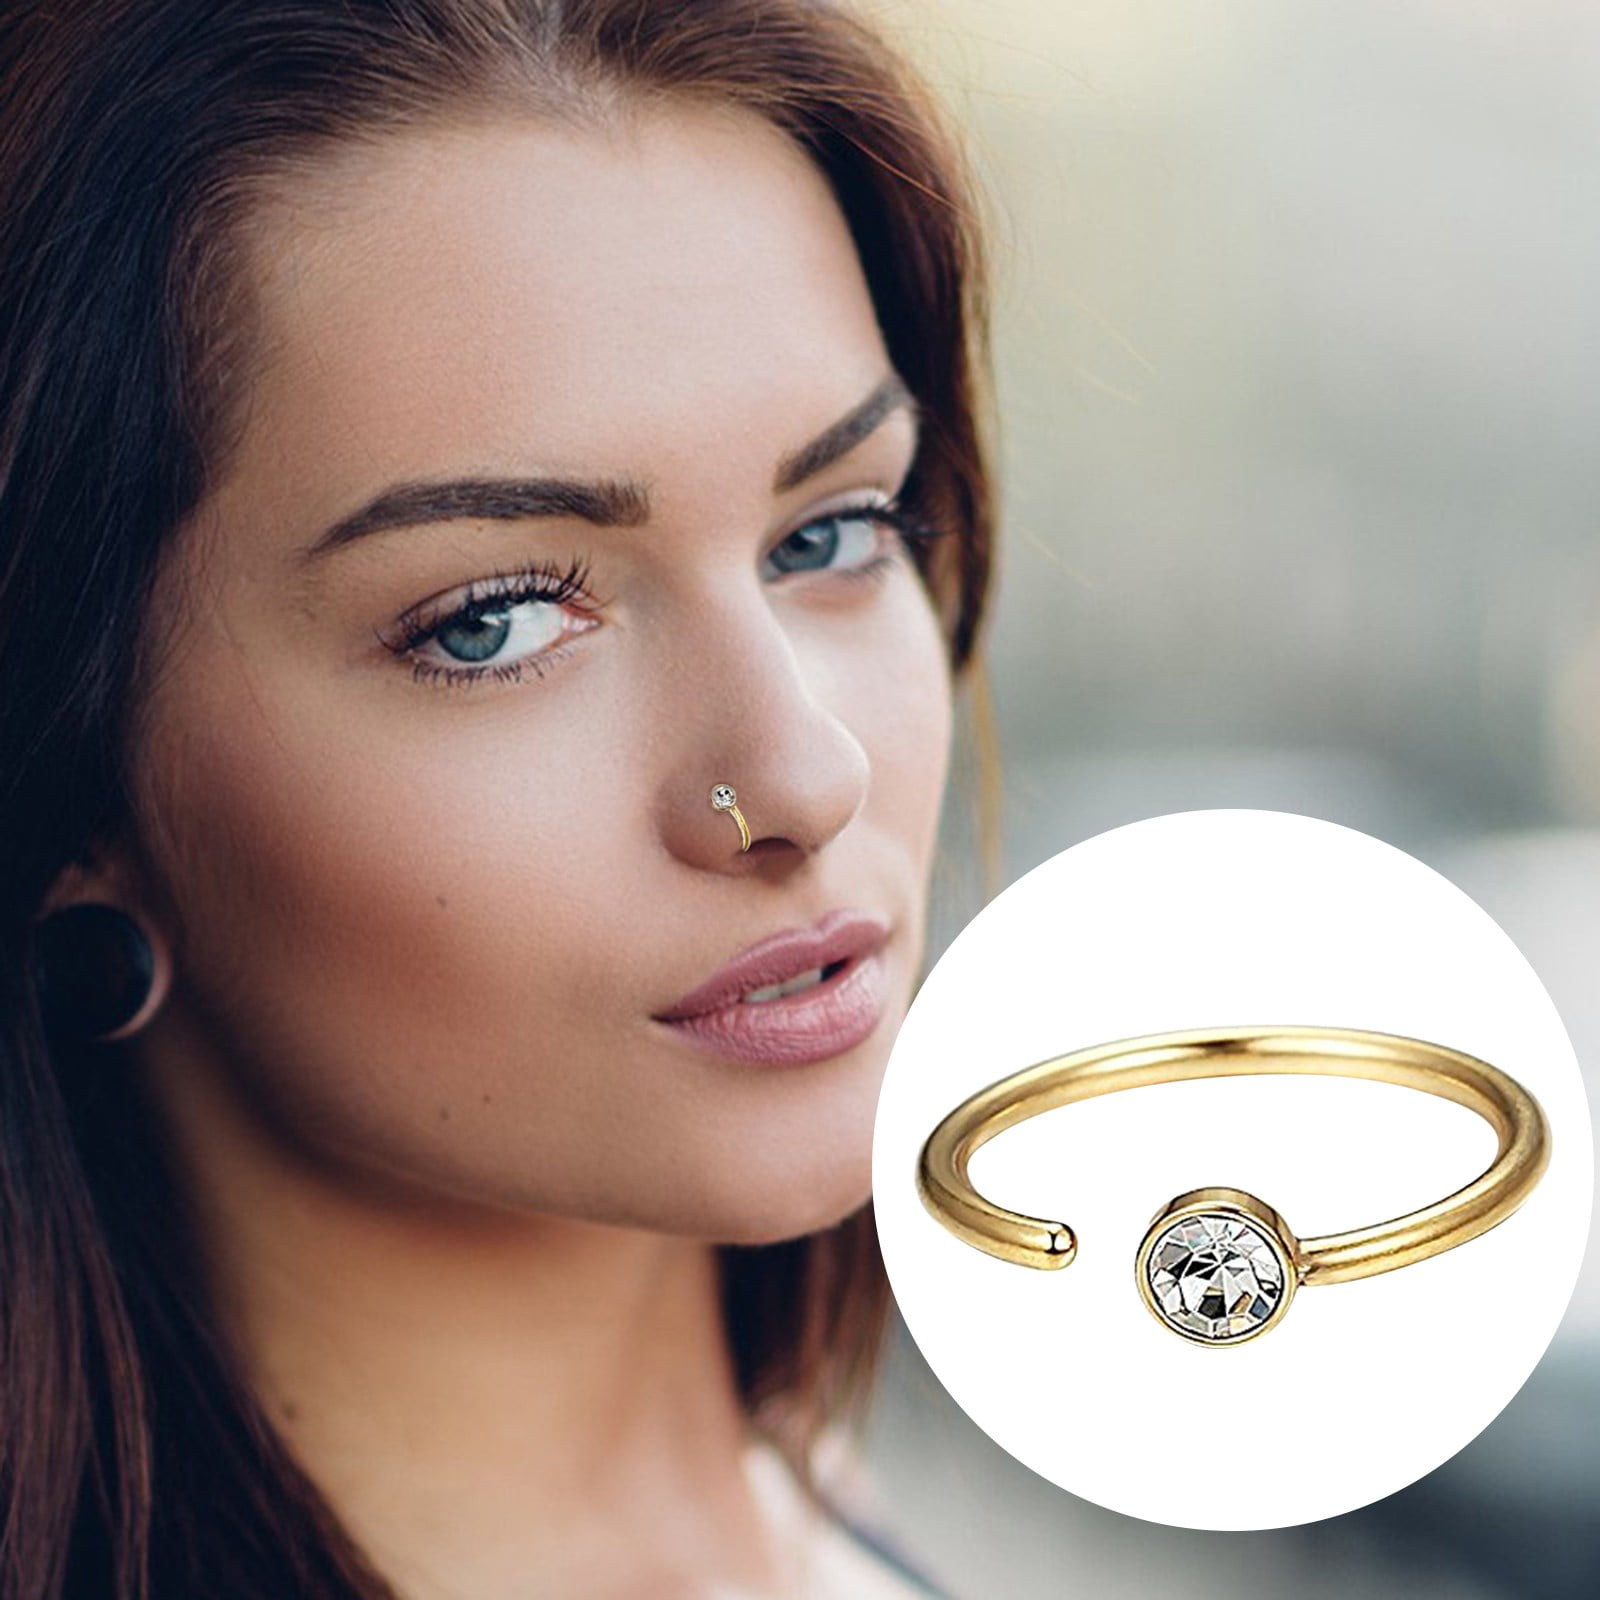 New Attractive Maharastrian Women Noserings,Maharastrian Traditional Wear  nose pin nose ring for wedding stylish gold